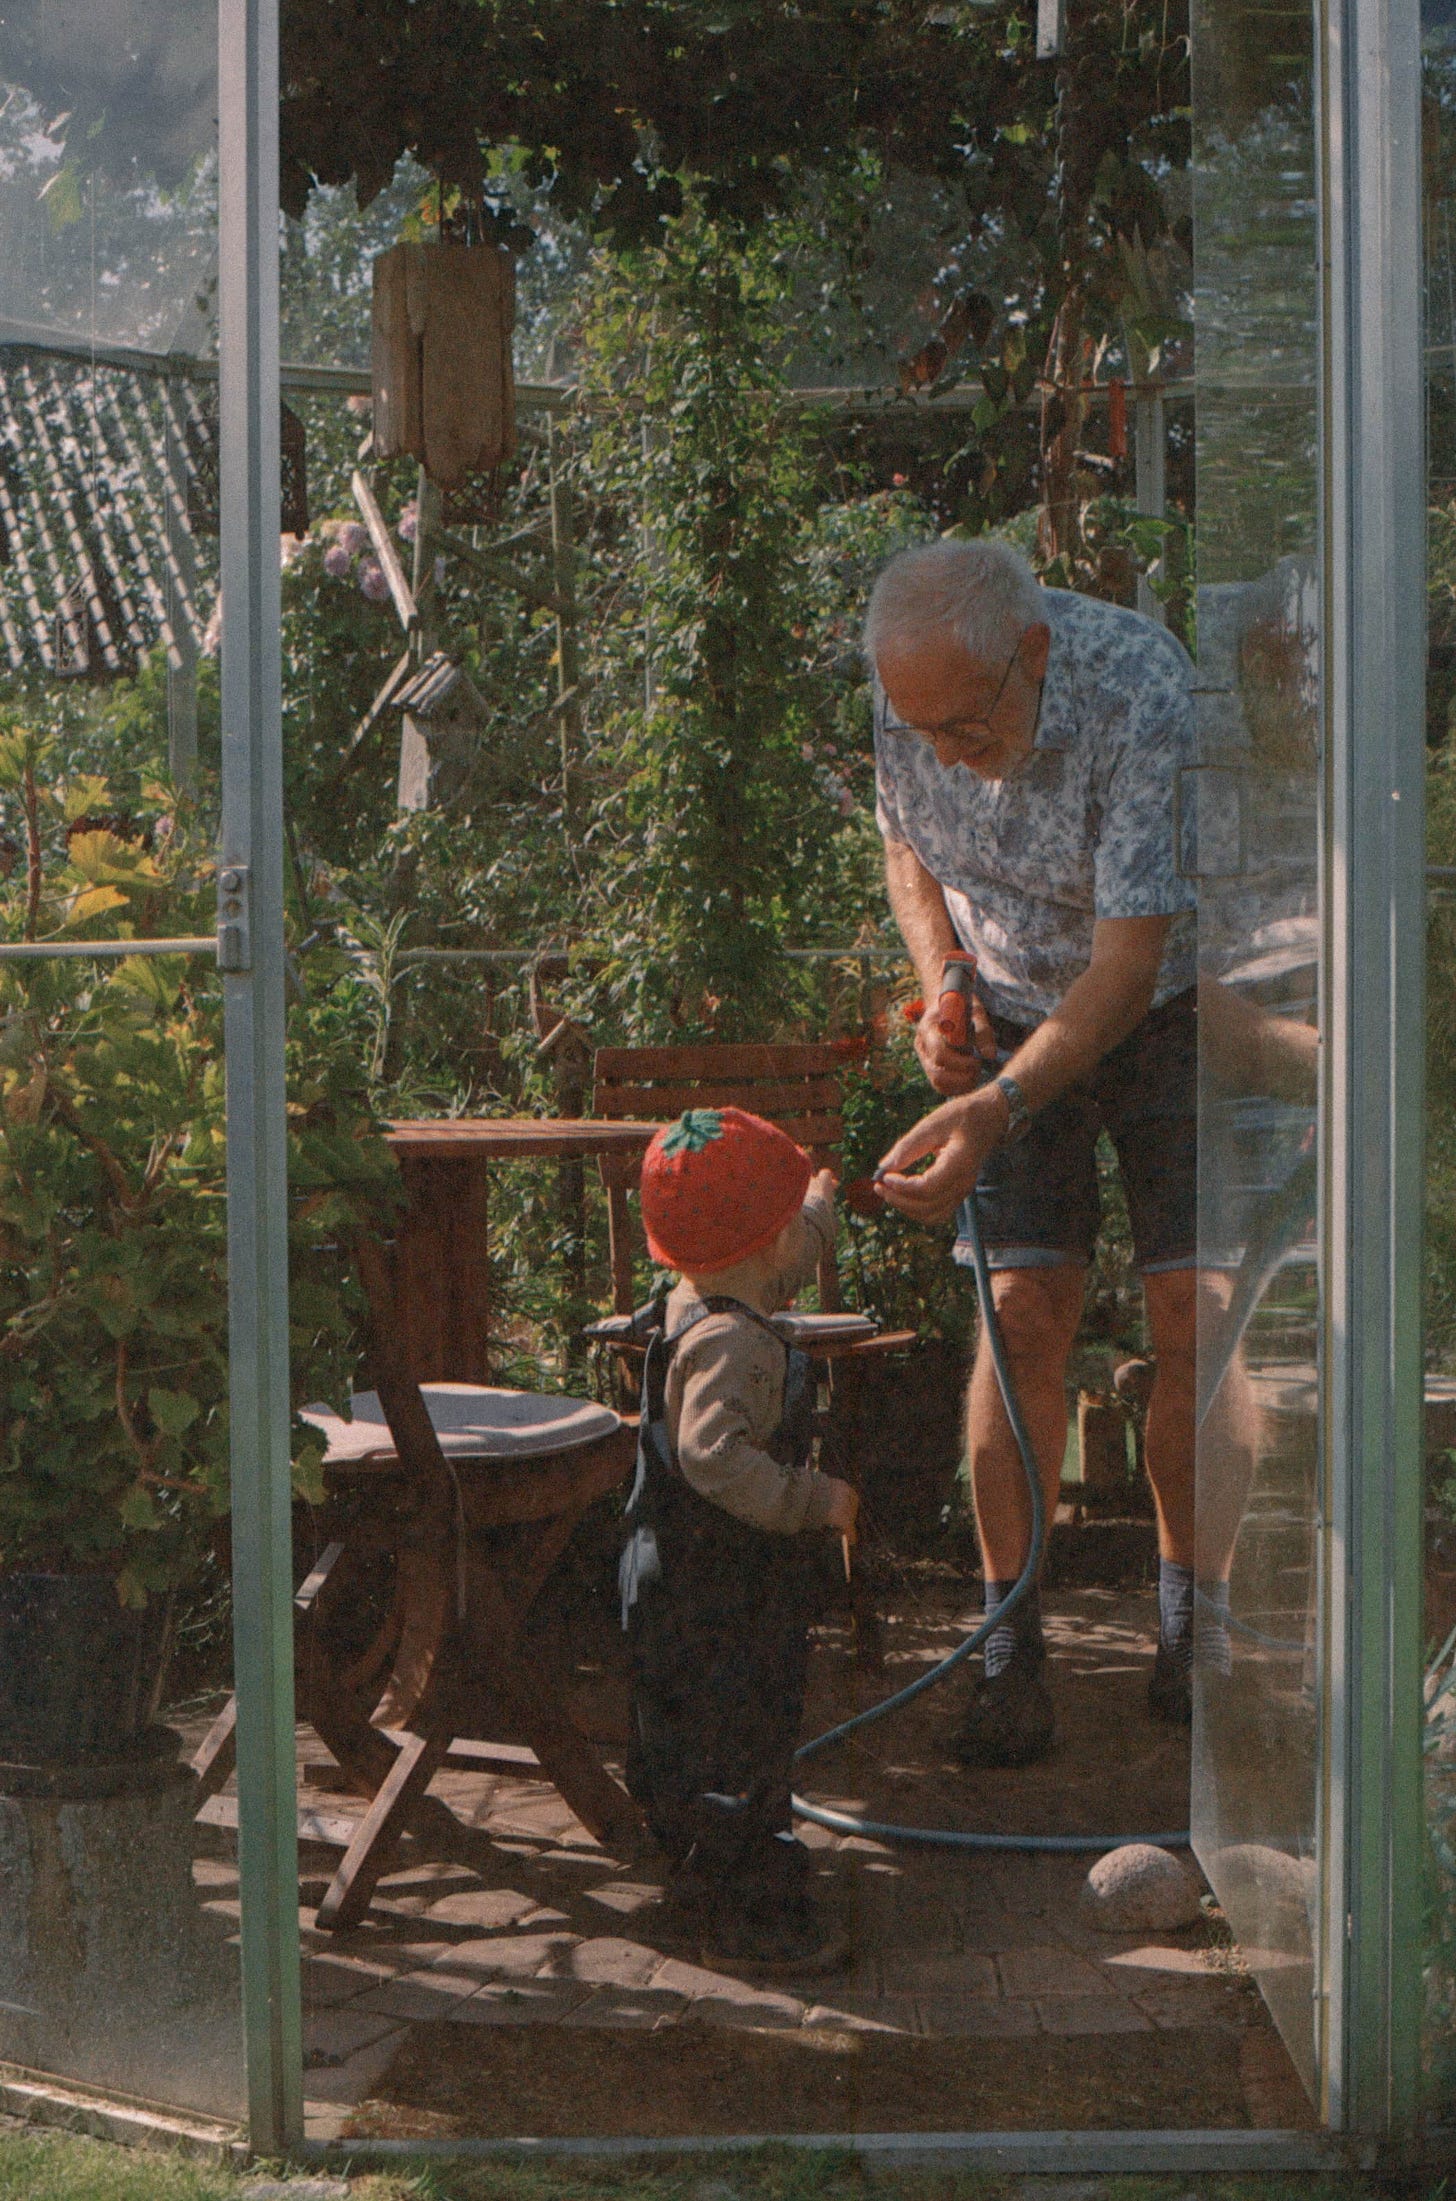 My son Uno wearing a red strawberry hat is reaching his hand out to take a grape handed over by my granddad in a flowery short sleeved shirt. They both stand in the glasshouse in which the grape grew.